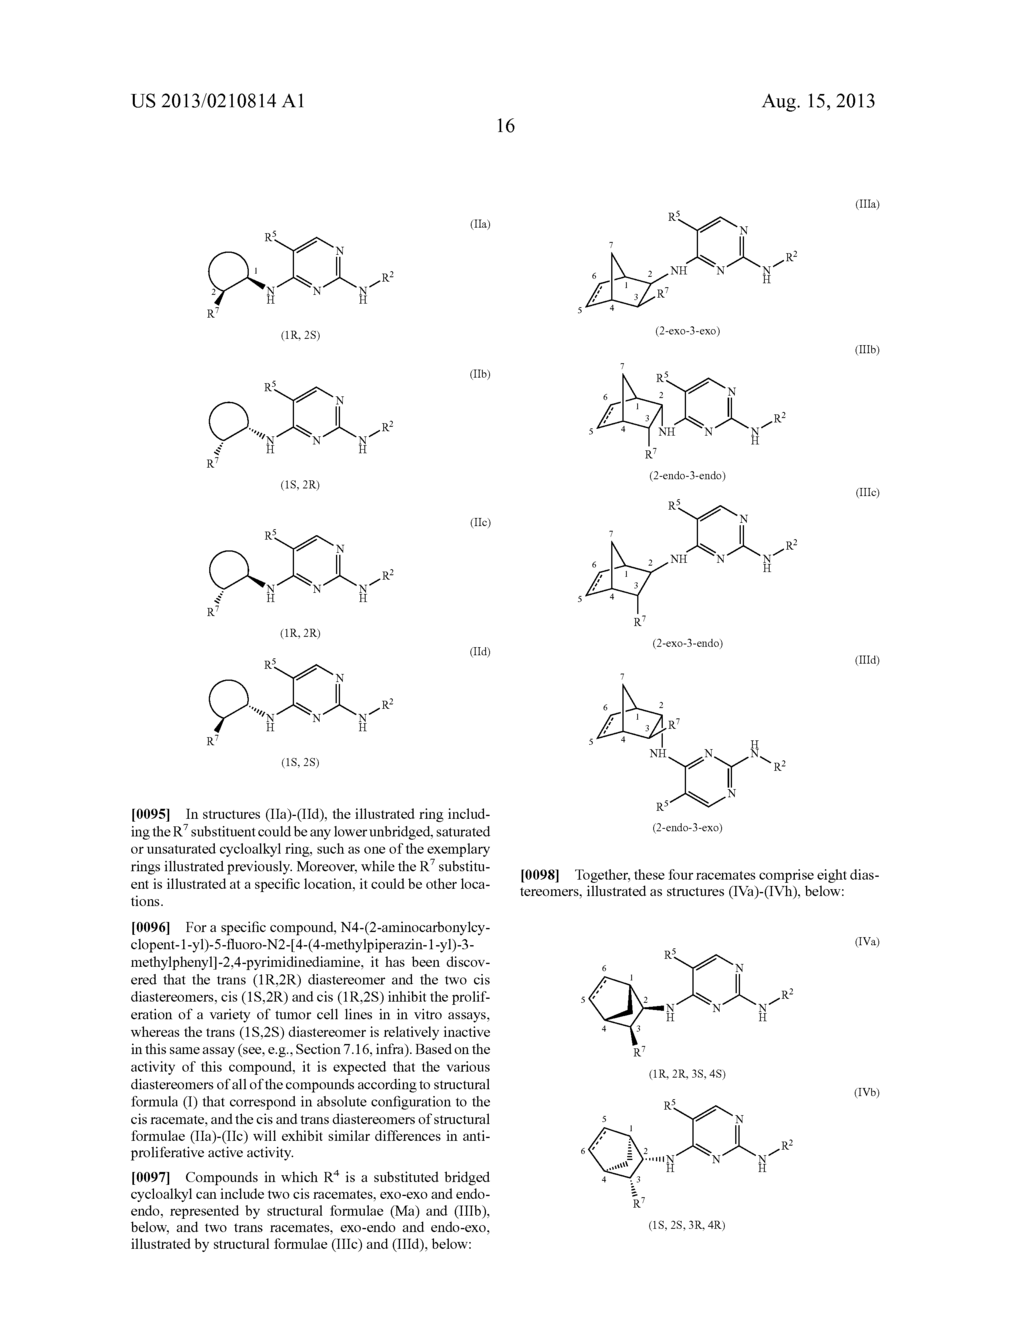 Cycloalkyl Substituted Pyrimidinediamine Compounds And Their Uses - diagram, schematic, and image 21